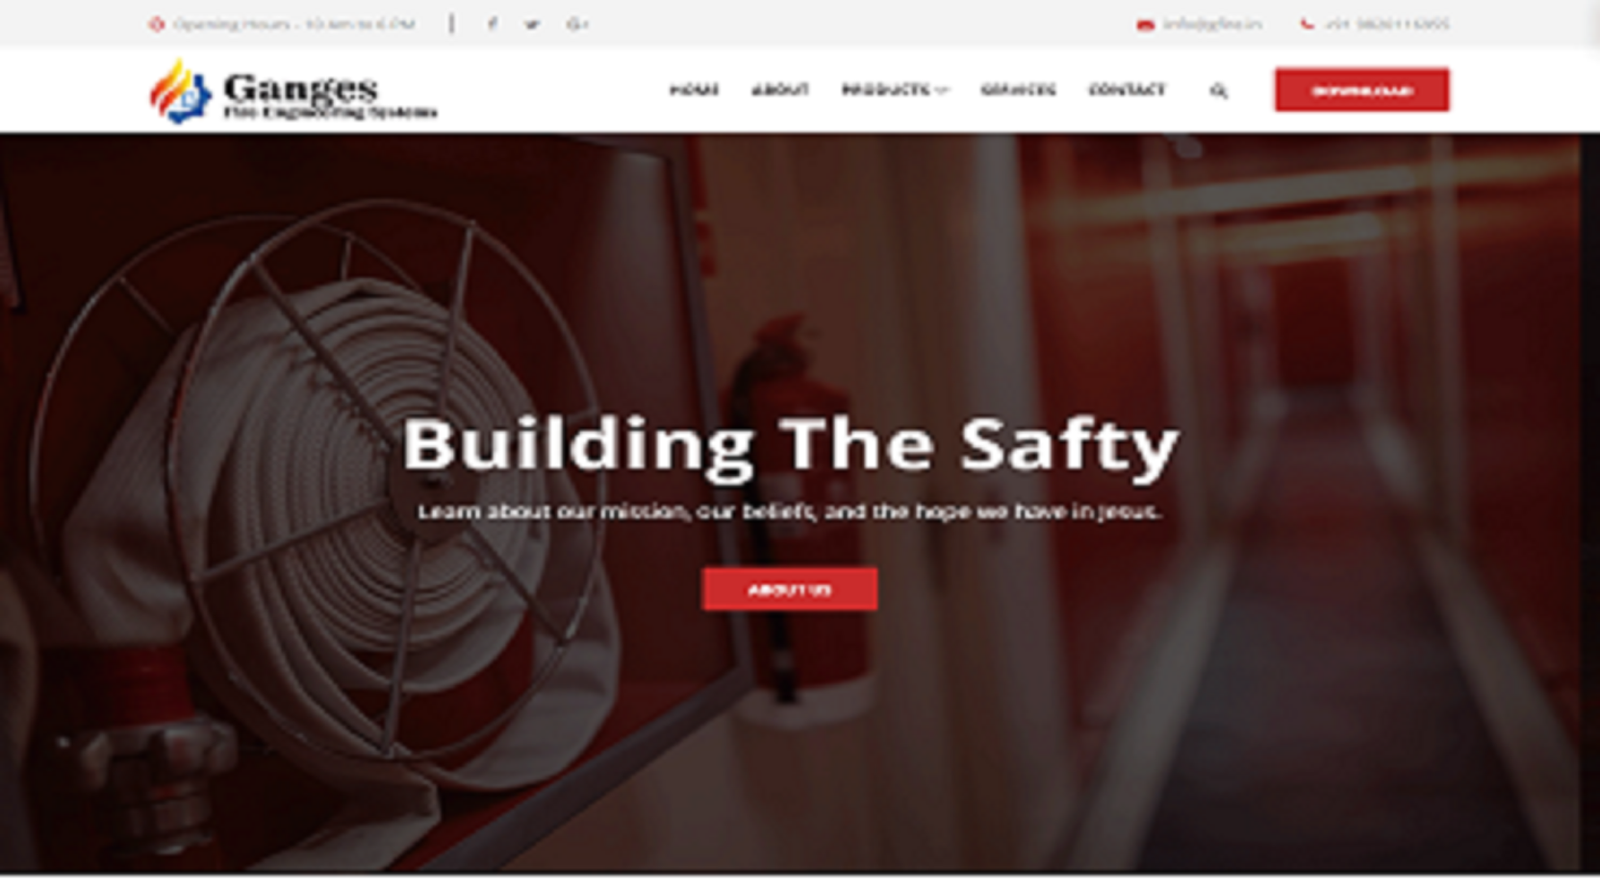 Ganges Fire Engineering Systems